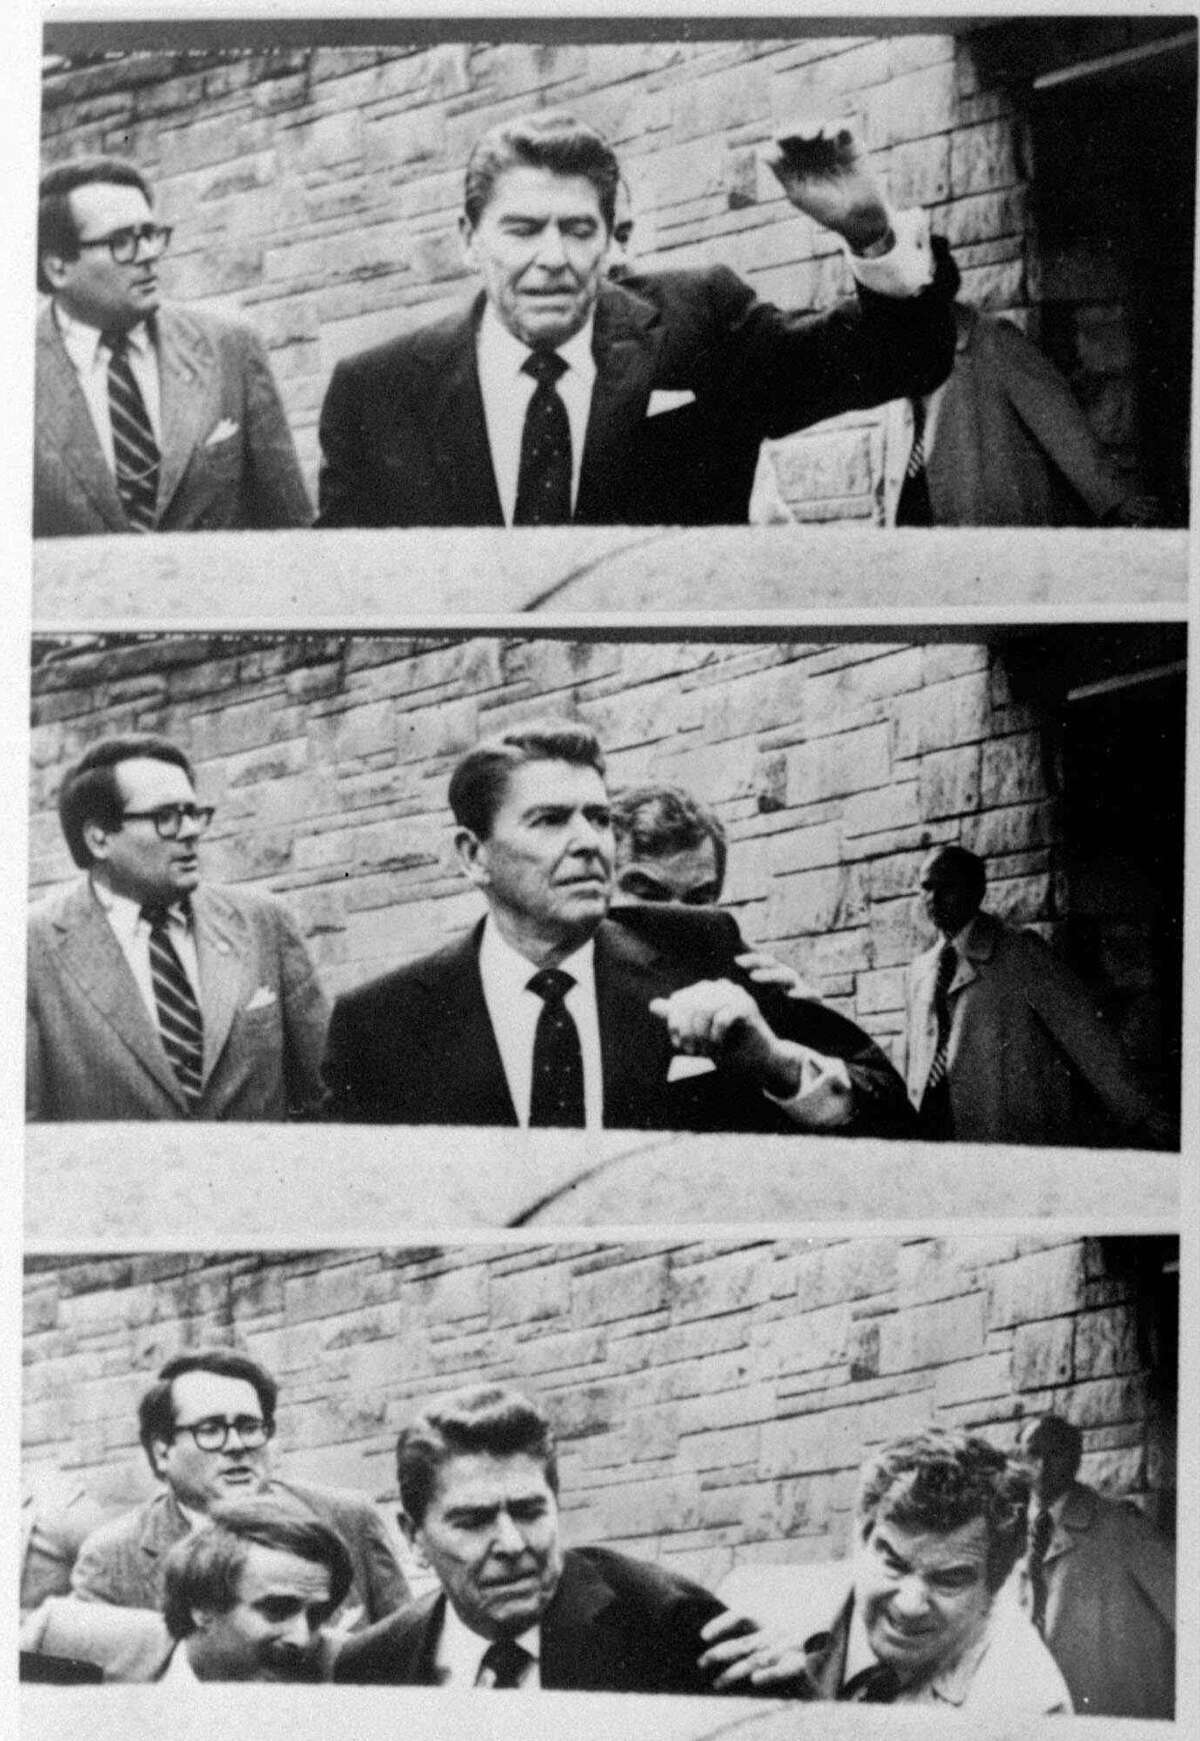 President Reagan waves, then looks up before being shoved into the Presidential limousine by Secret Service agents after being shot outside a Washington hotel in this photo sequence.